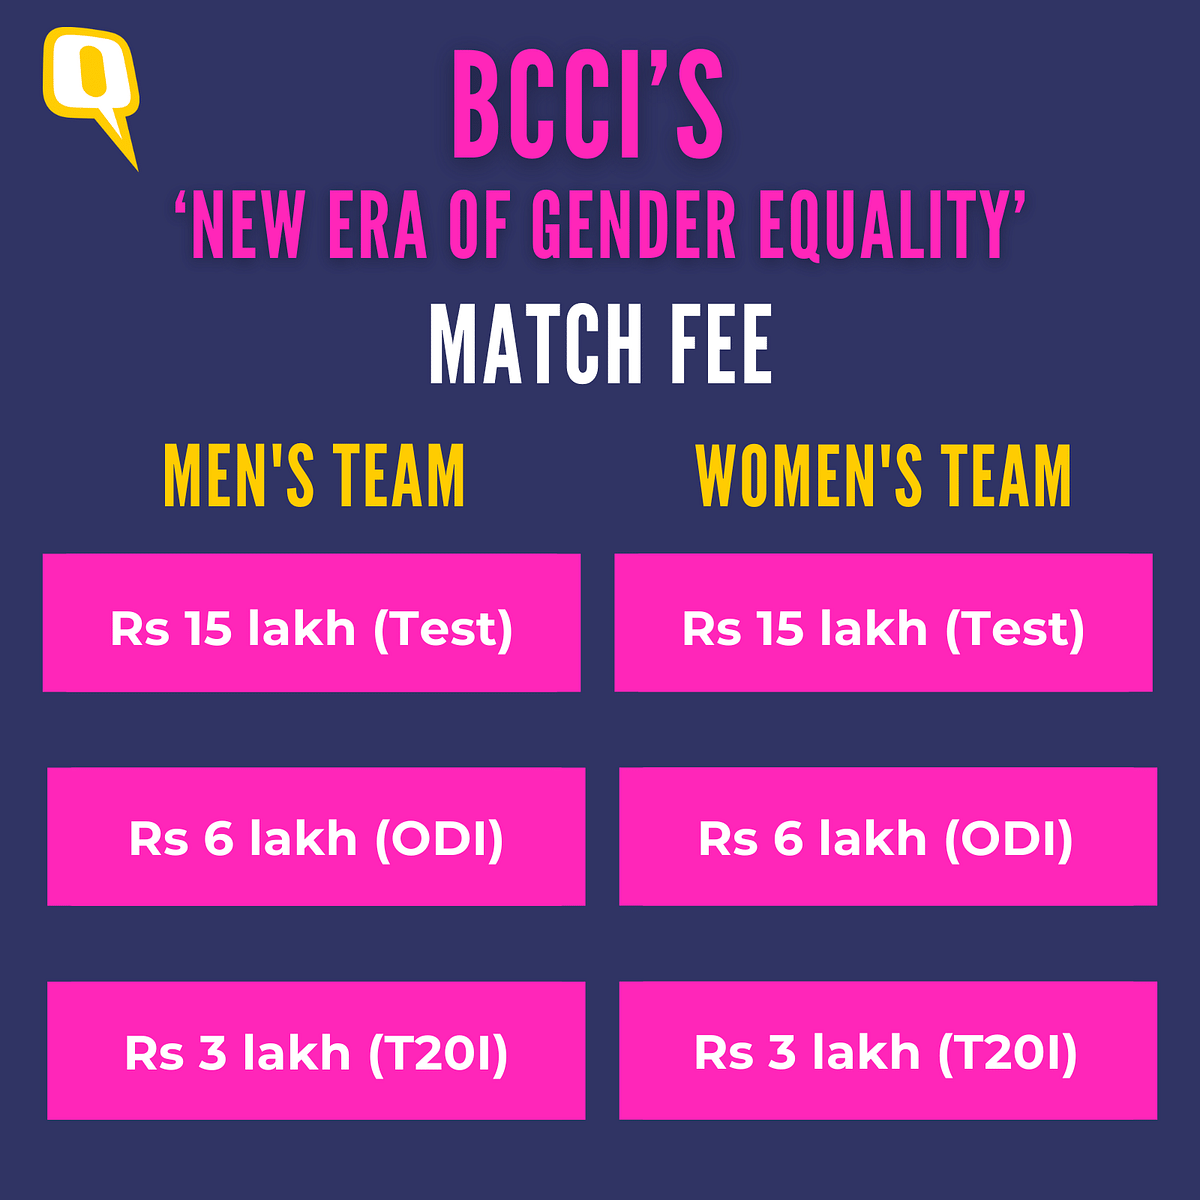 BCCI's revised fee structure will now see both men and women cricketers receive the same amount as match fee.